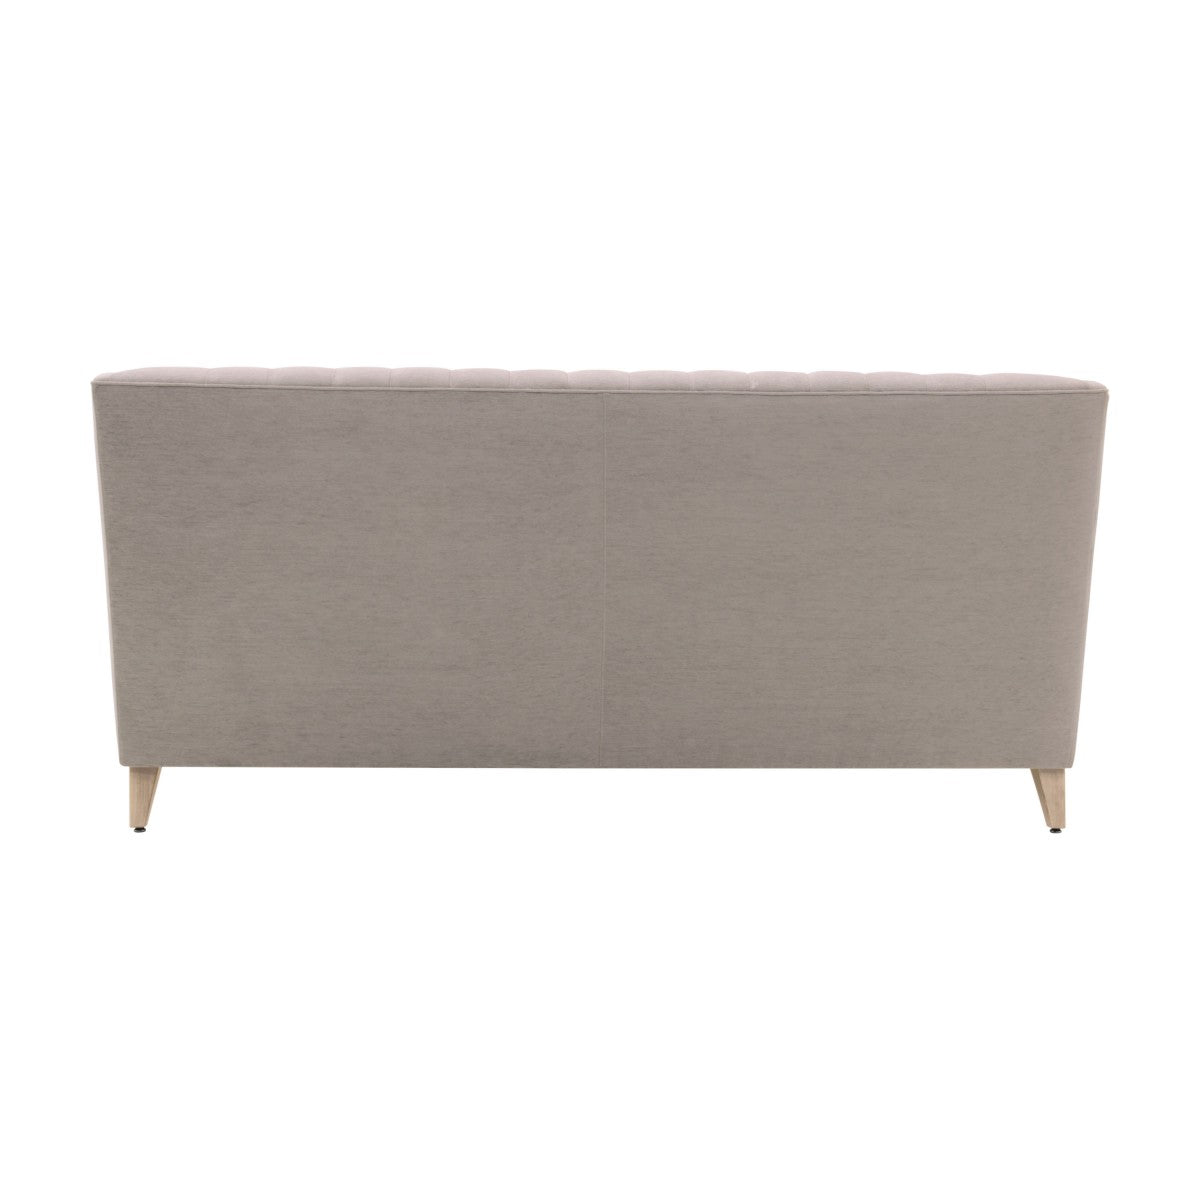 Custom Bespoke Upholstered Contemporary Large Seating Area Extra Large Sofa MS013 Custom Made To Order